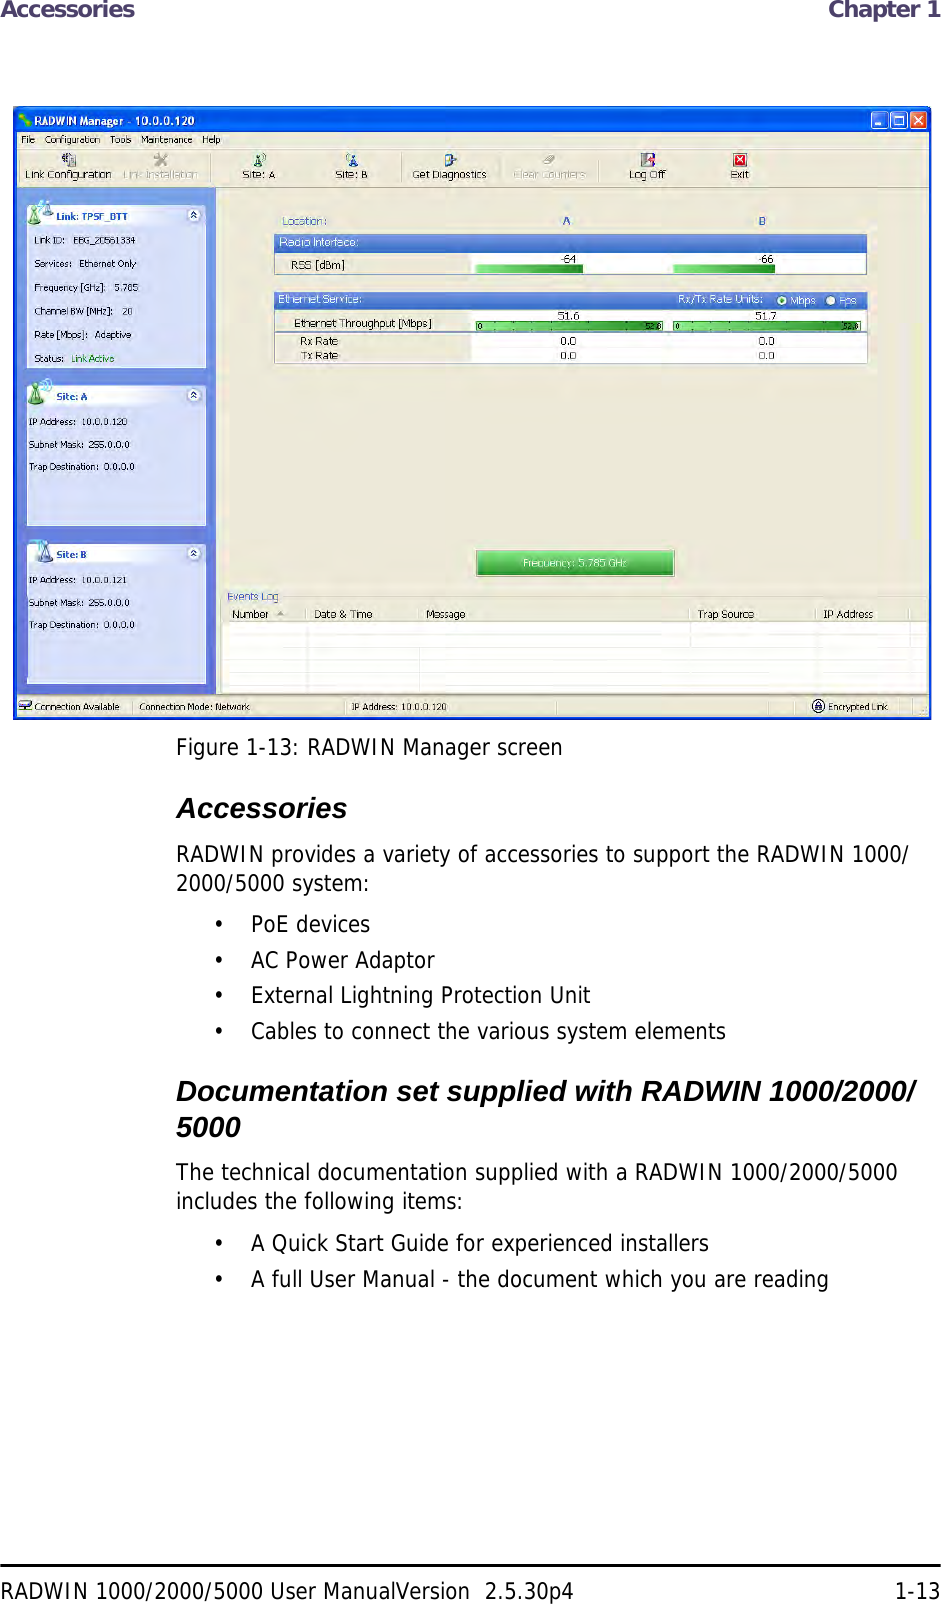 Accessories  Chapter 1RADWIN 1000/2000/5000 User ManualVersion  2.5.30p4 1-13Figure 1-13: RADWIN Manager screenAccessoriesRADWIN provides a variety of accessories to support the RADWIN 1000/2000/5000 system:• PoE devices• AC Power Adaptor• External Lightning Protection Unit• Cables to connect the various system elementsDocumentation set supplied with RADWIN 1000/2000/5000The technical documentation supplied with a RADWIN 1000/2000/5000 includes the following items:• A Quick Start Guide for experienced installers• A full User Manual - the document which you are reading